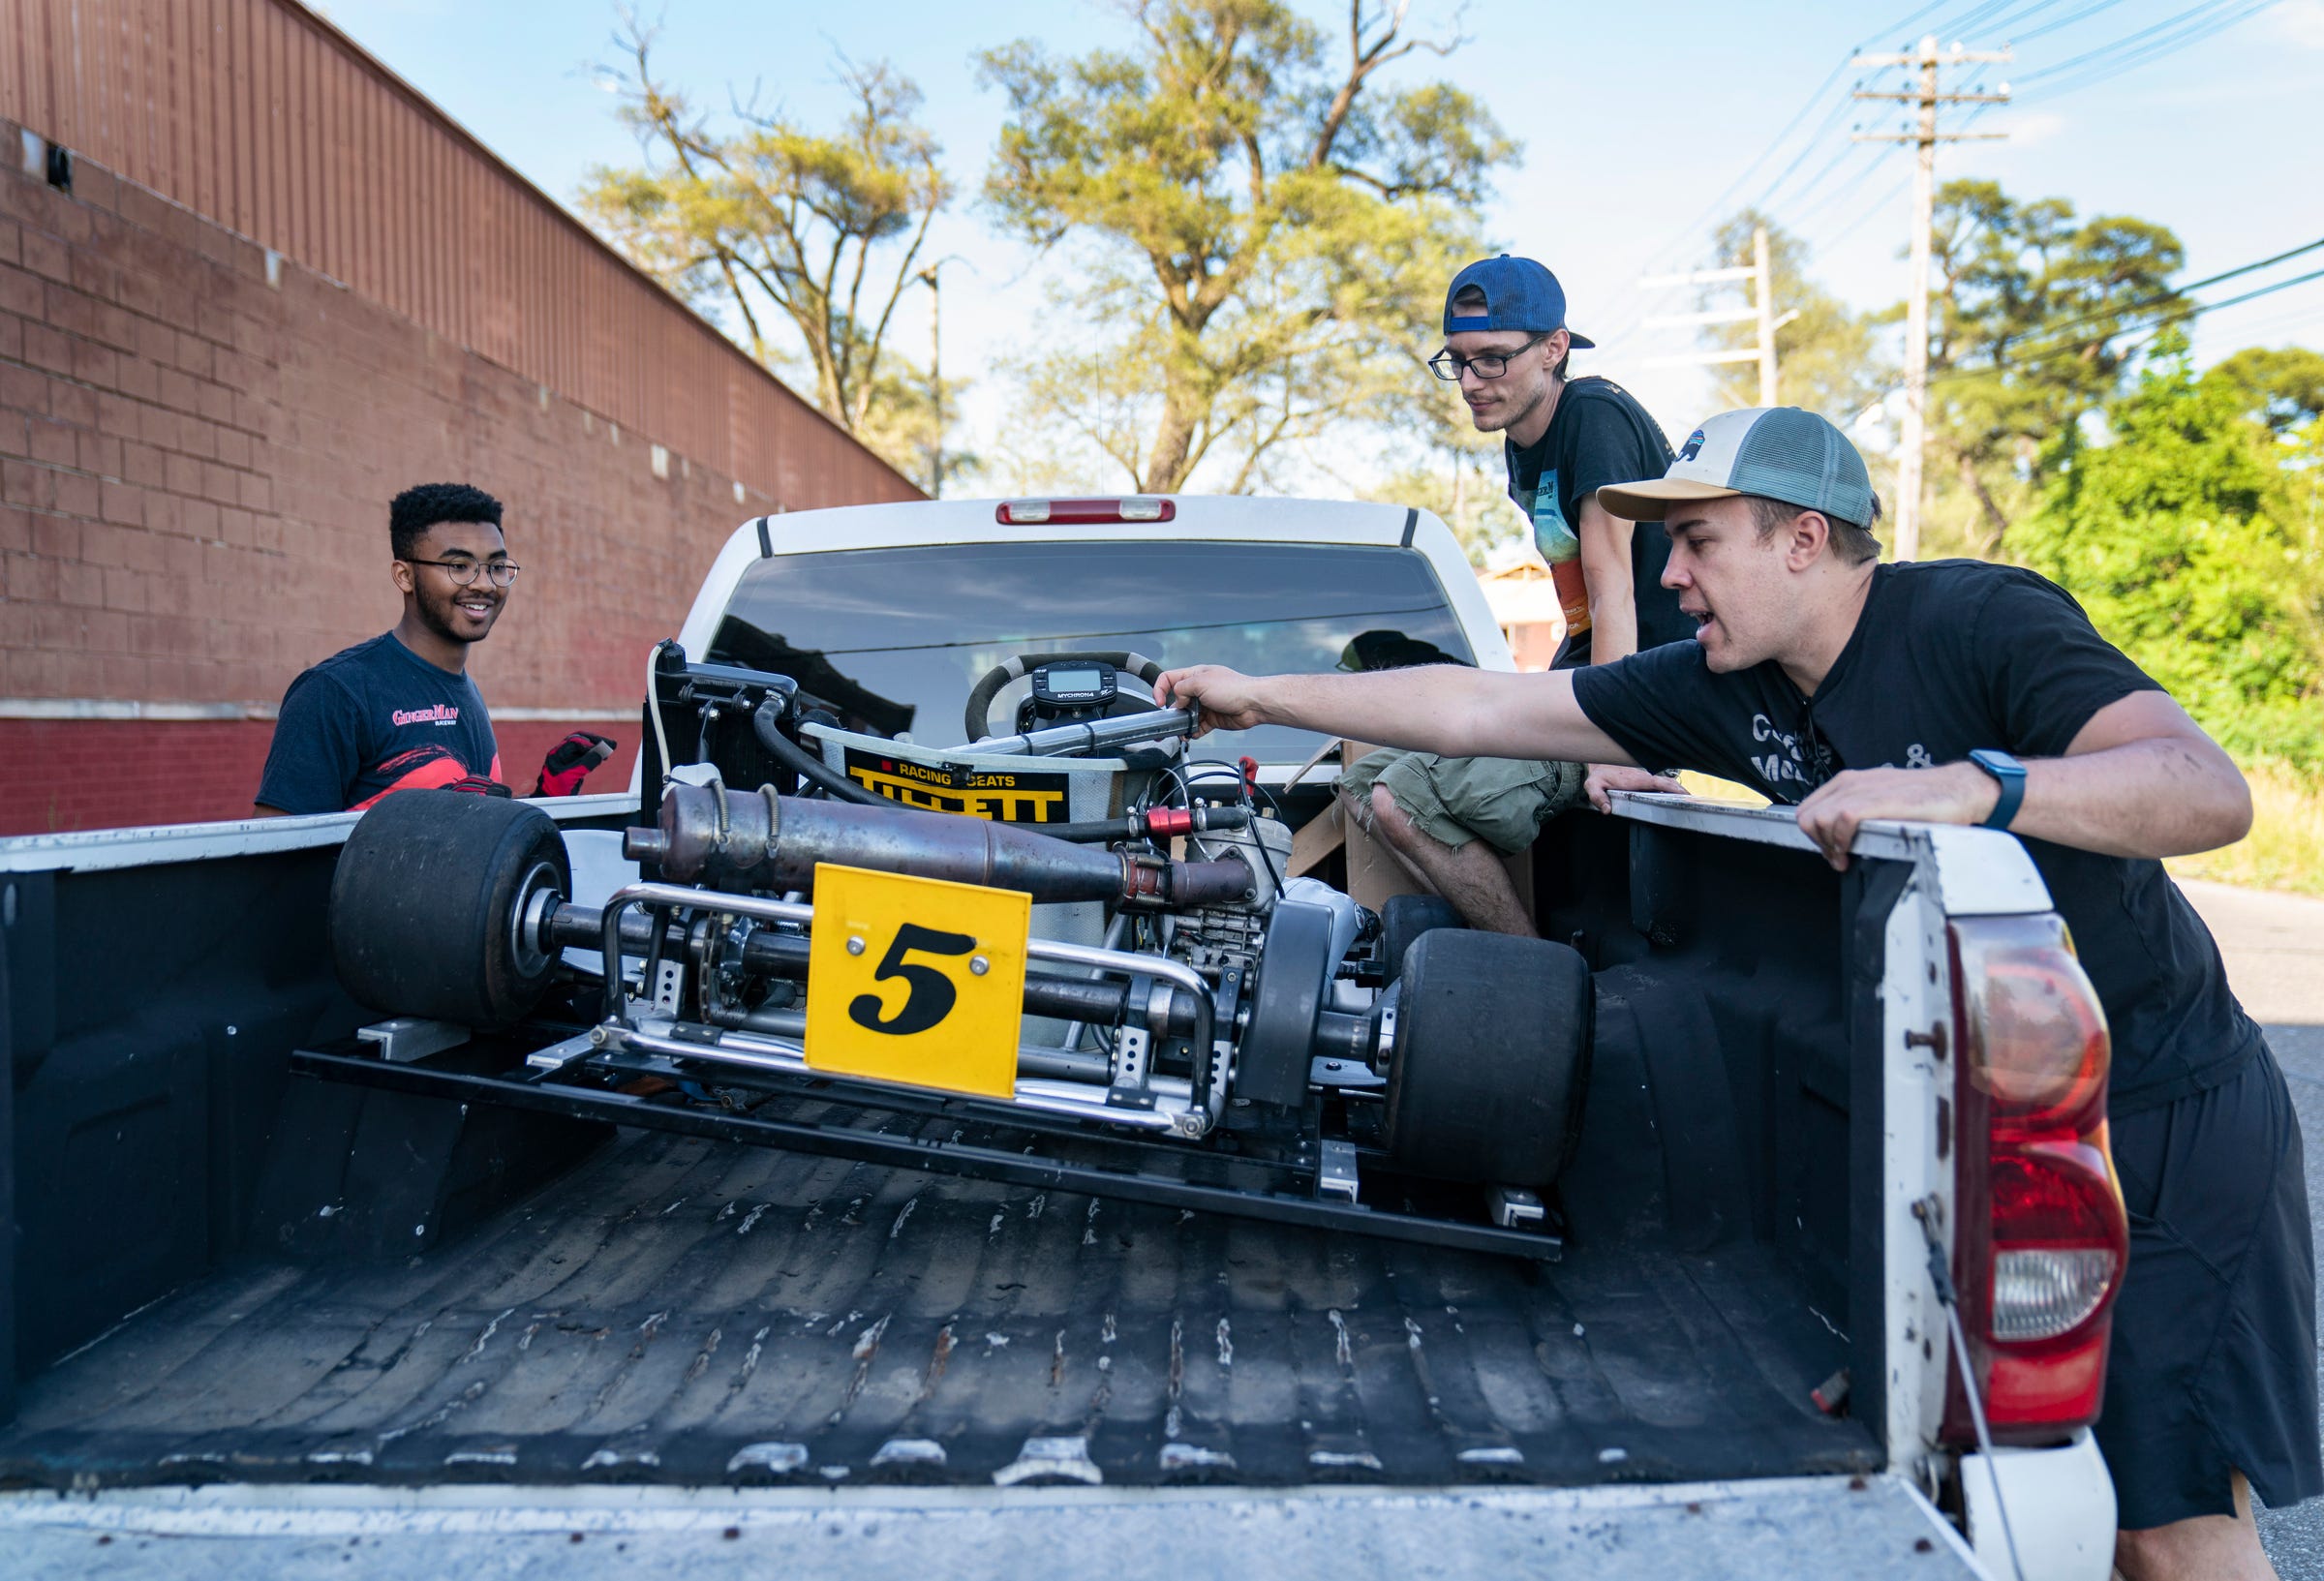 Detroit Student Race Team member Noah Christian, 17, of Detroit, left, works to unload a go kart with mentor Shane O'Connor, 31, and  team founder Andy Didorosi Wednesday, June 22, 2022 at their shop location in Detroit.